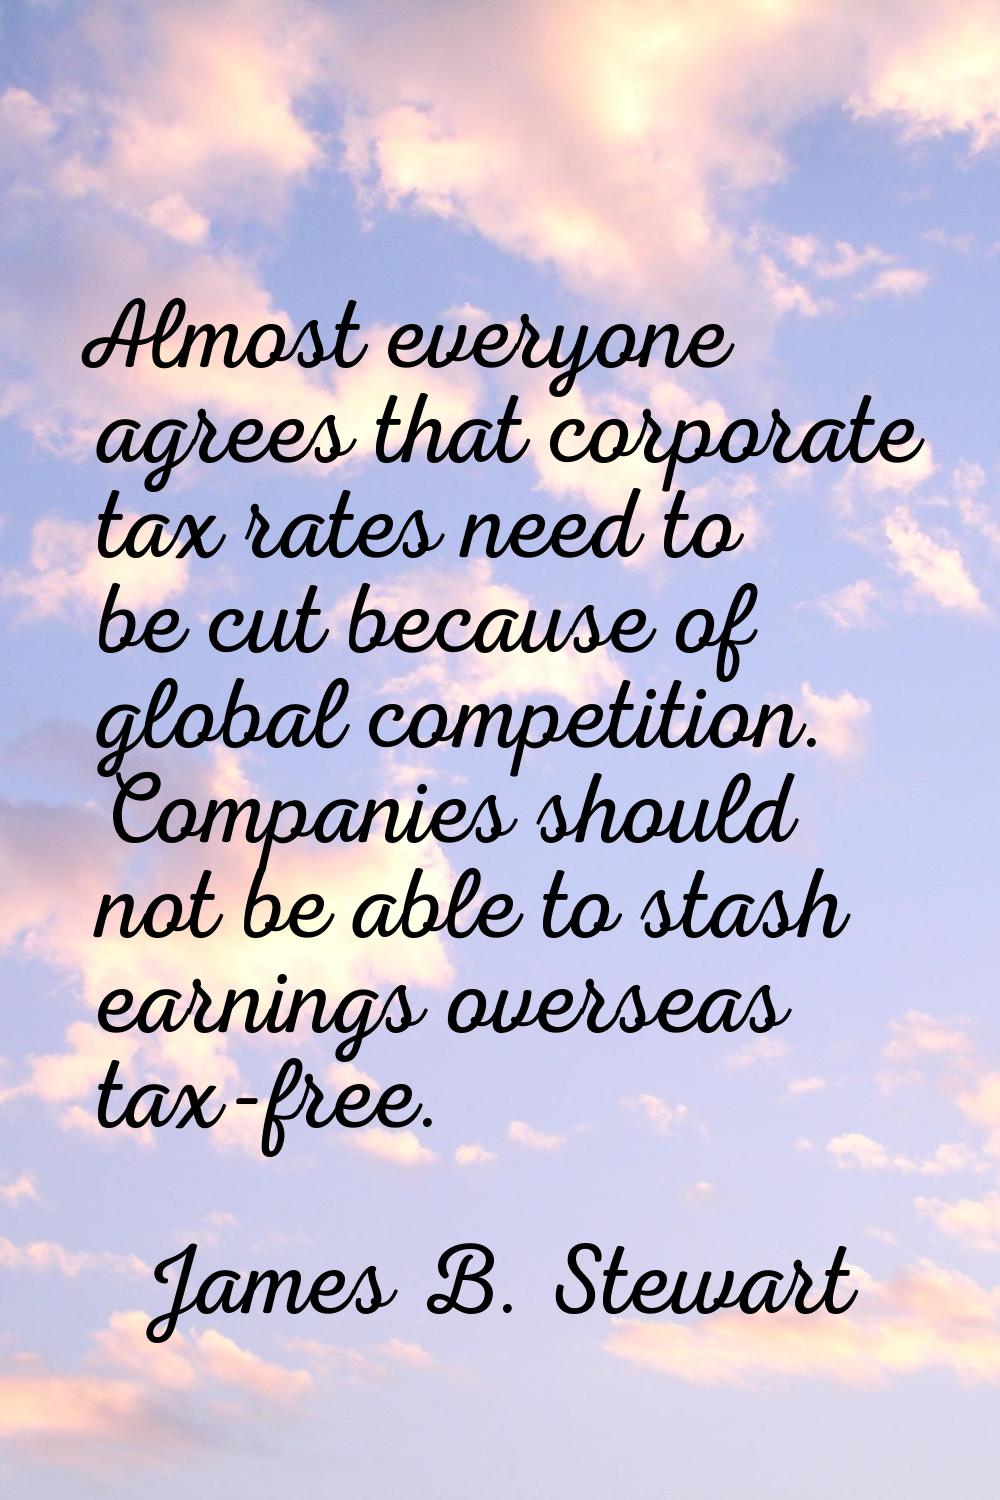 Almost everyone agrees that corporate tax rates need to be cut because of global competition. Compa